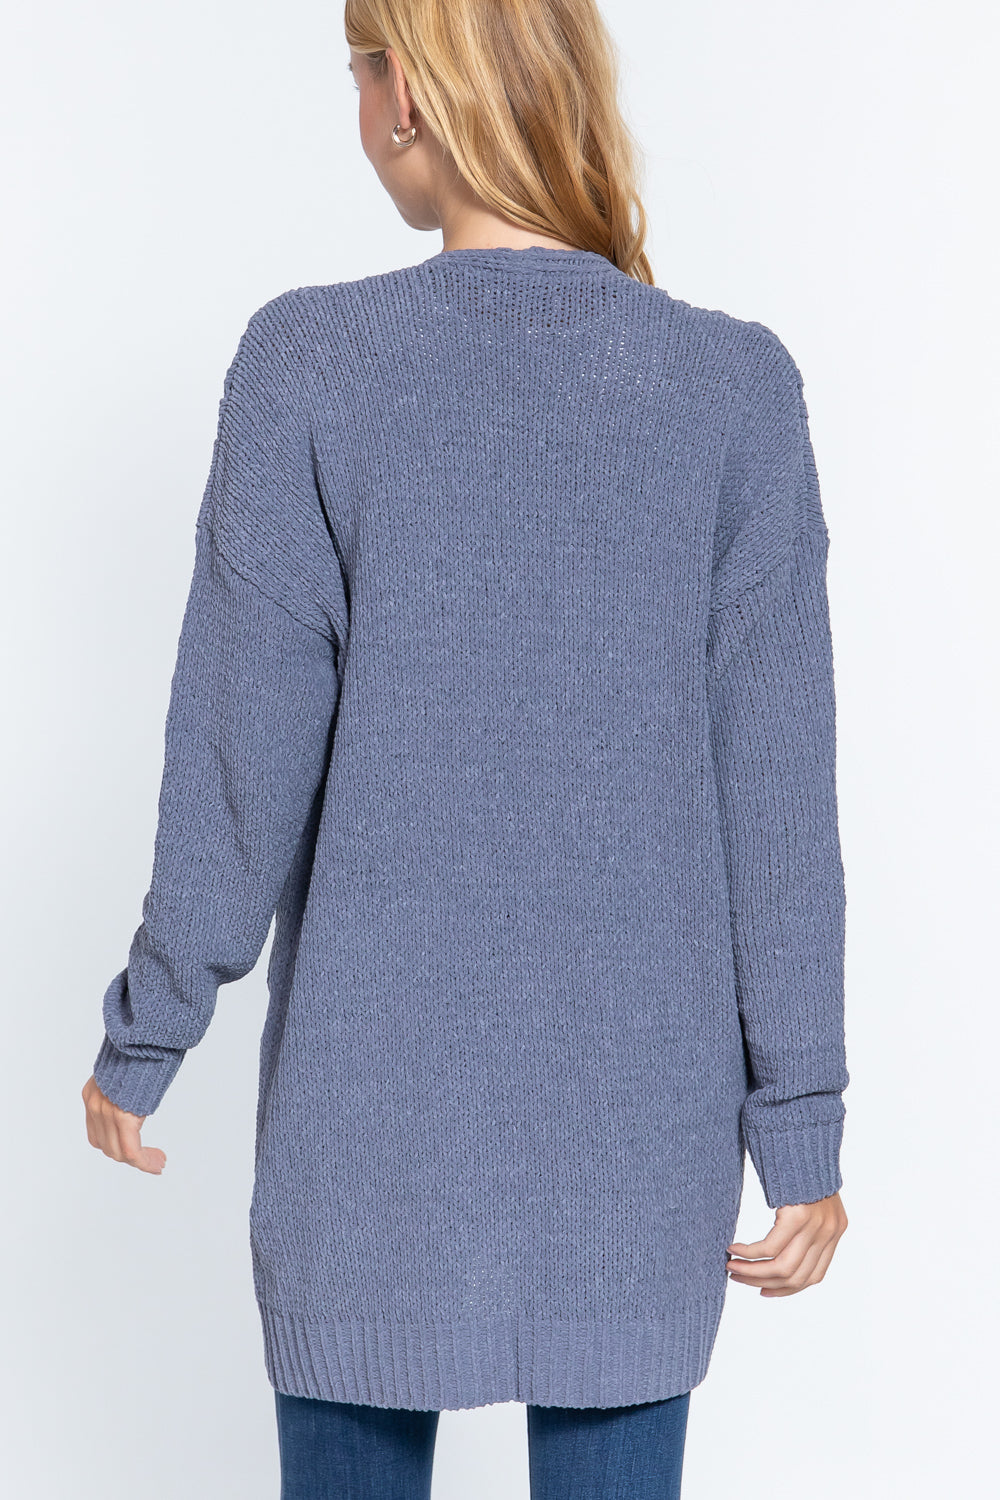 GREYISH BLUE Chenille Sweater Cardigan - 3 colors - Ships from The US - women's cardigan at TFC&H Co.